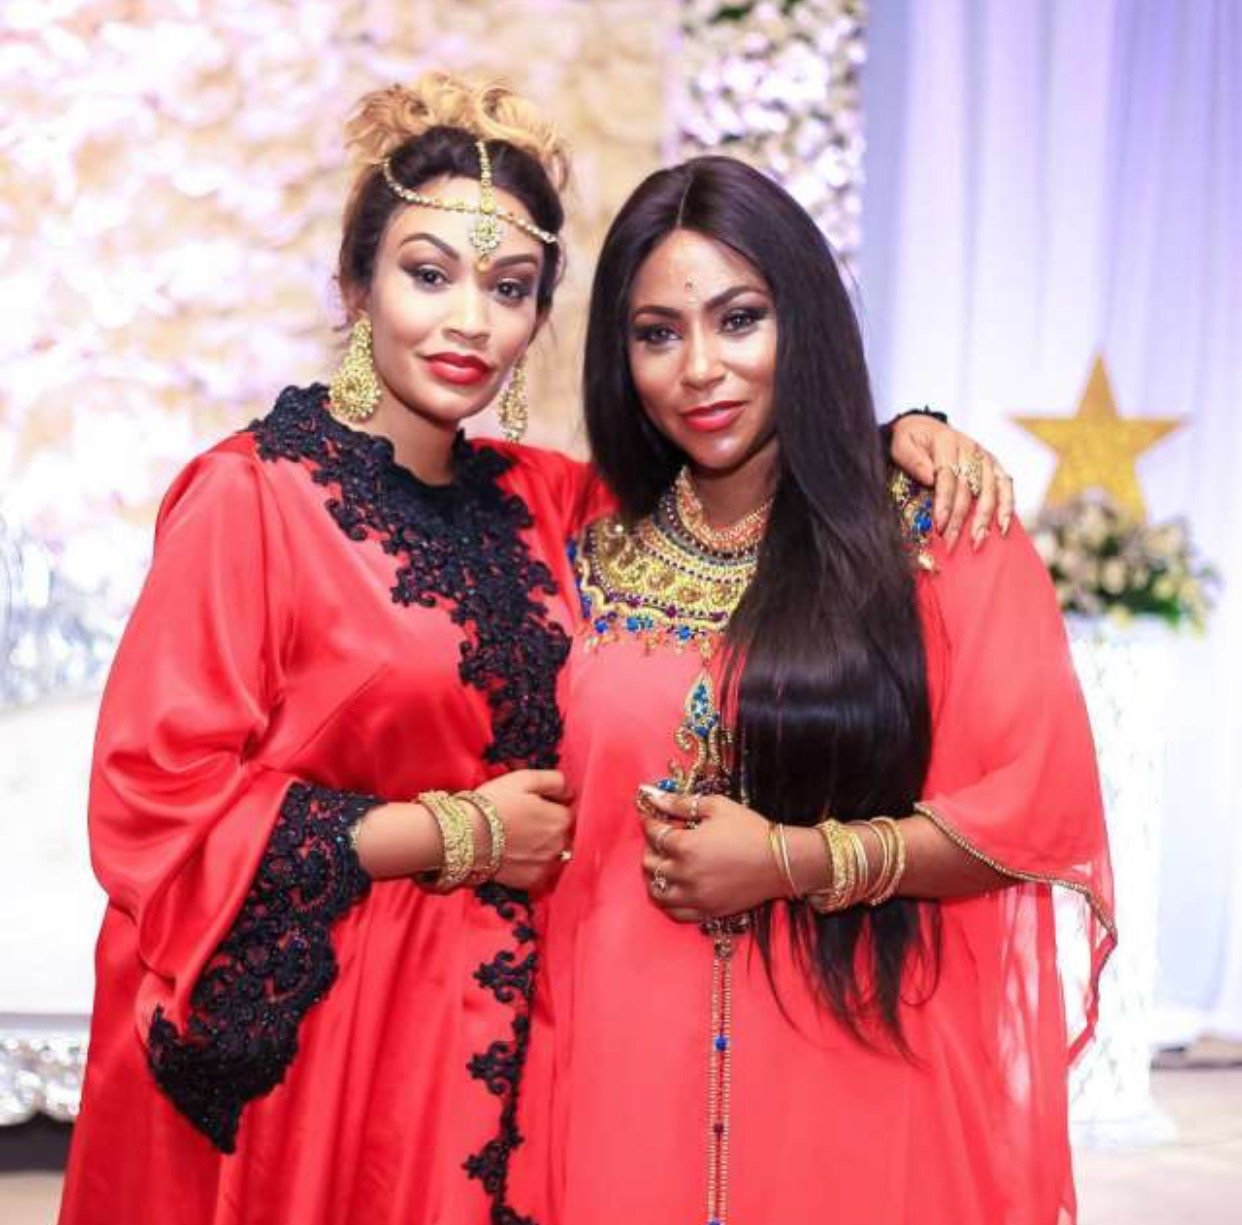 Diamond Platnumz eldest sister hints that her brother and Zari Hassan are still together!